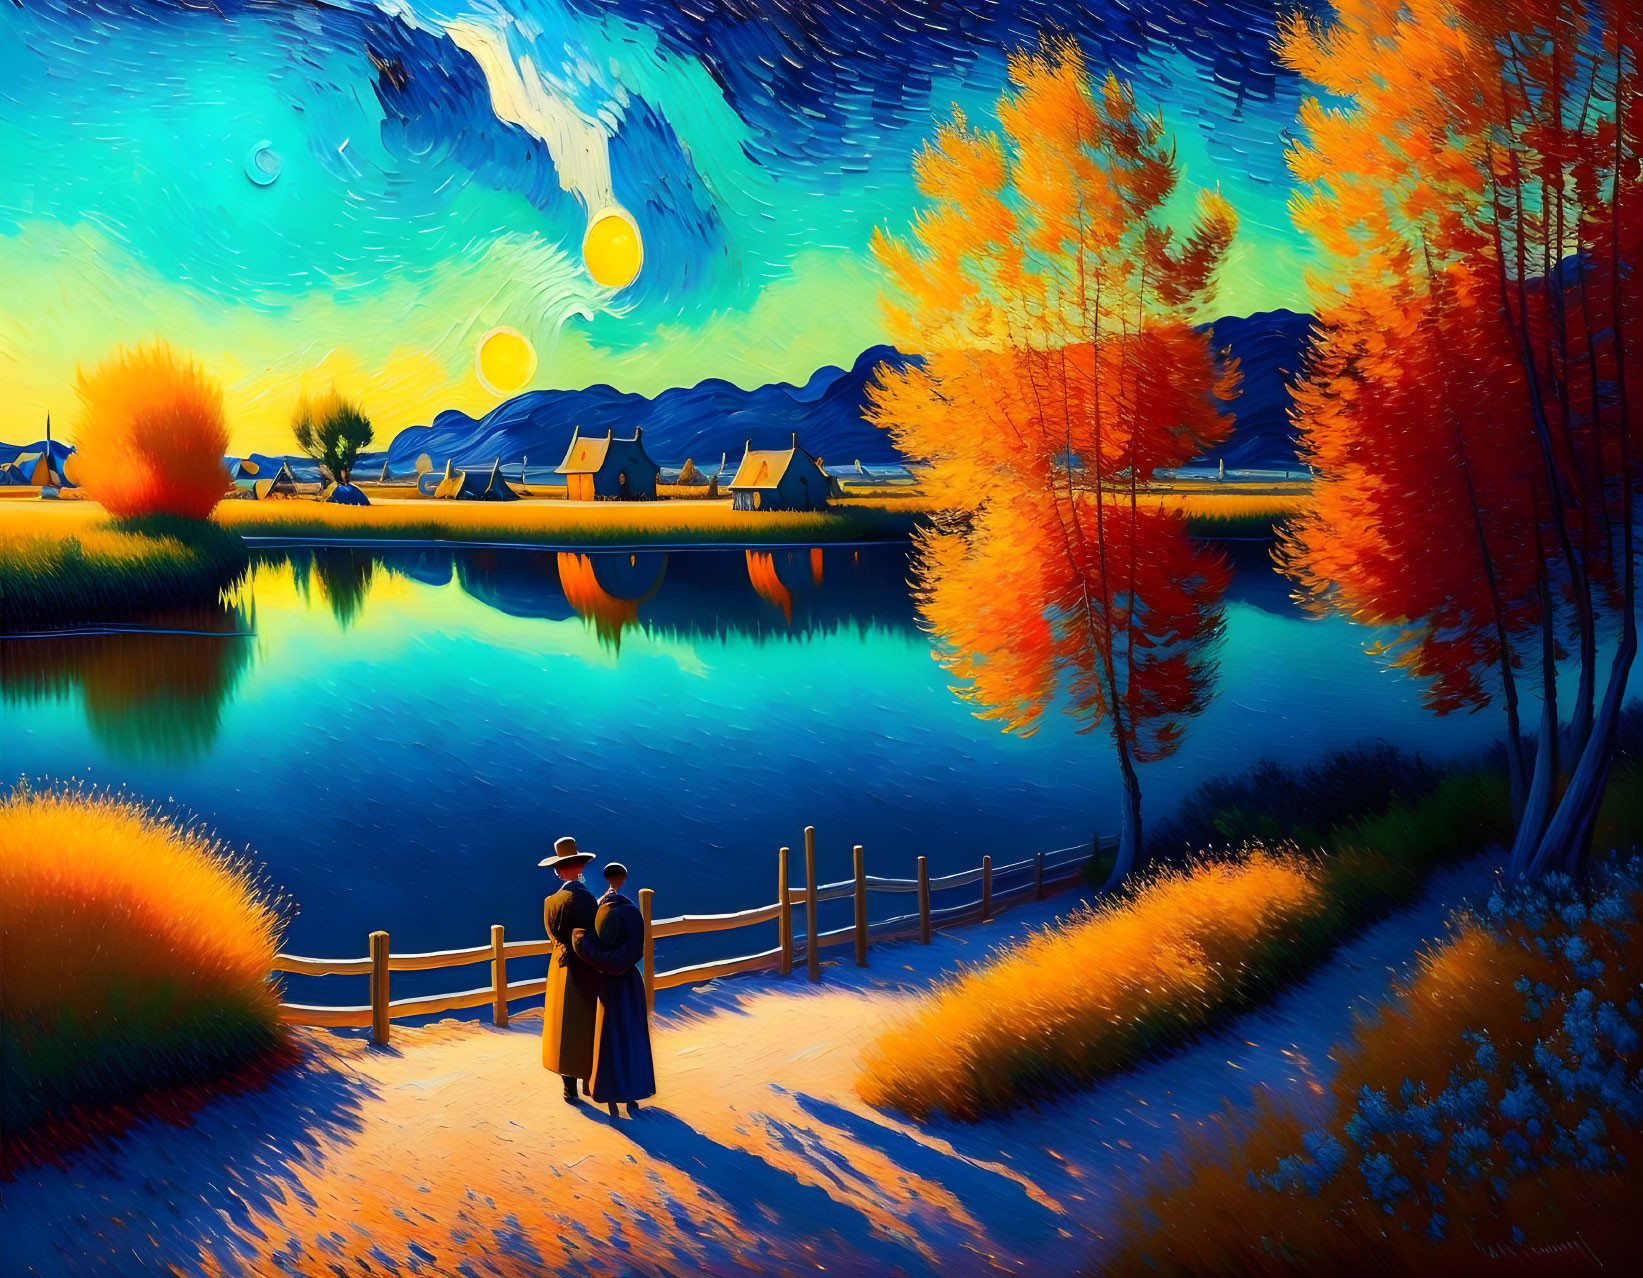 Colorful autumn landscape with trees, couple by lake, multiple moons in whimsical sky